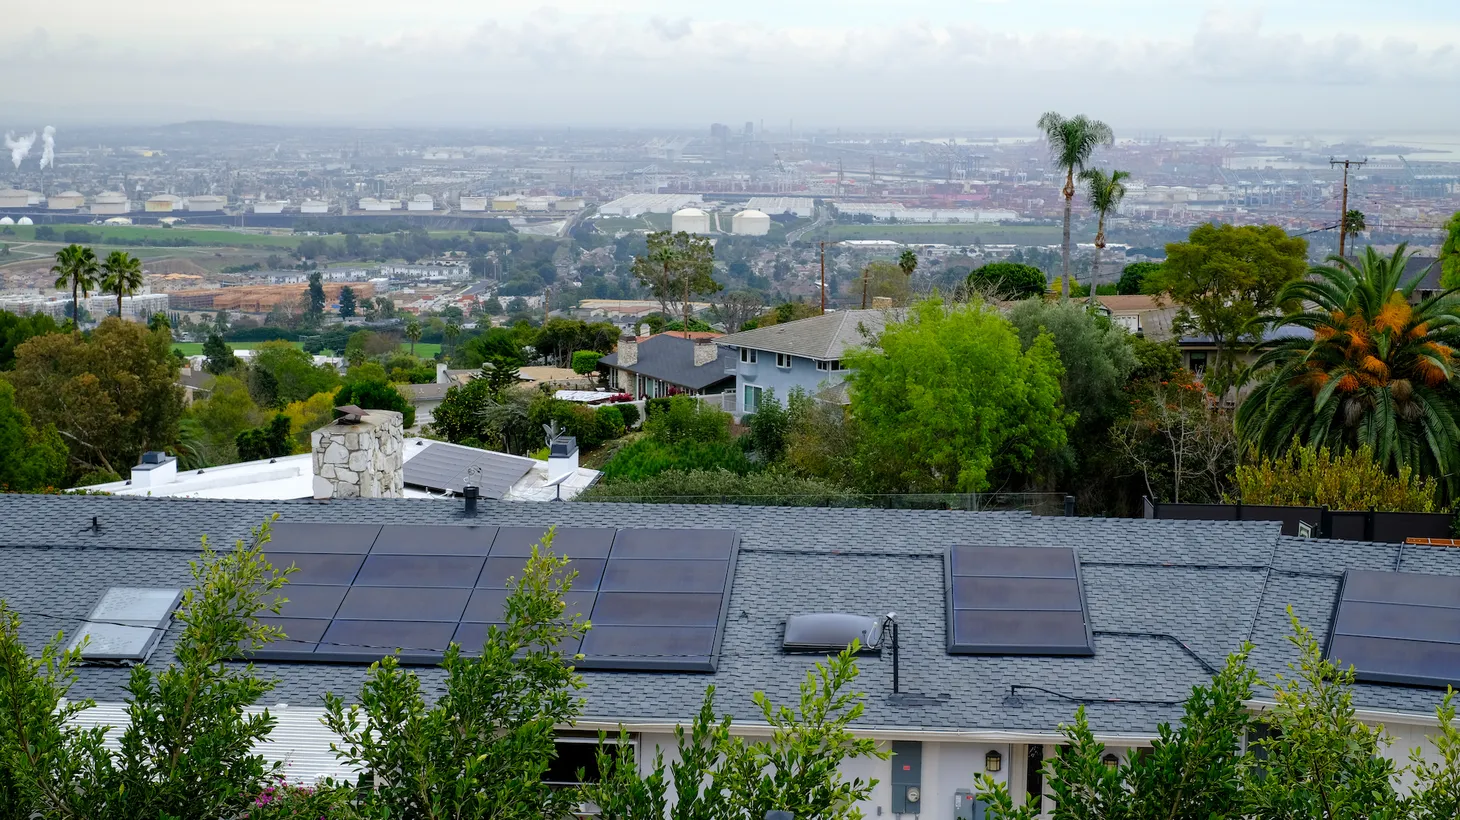 A house is equipped with solar panels in Palos Verdes, California, January 2, 2023.